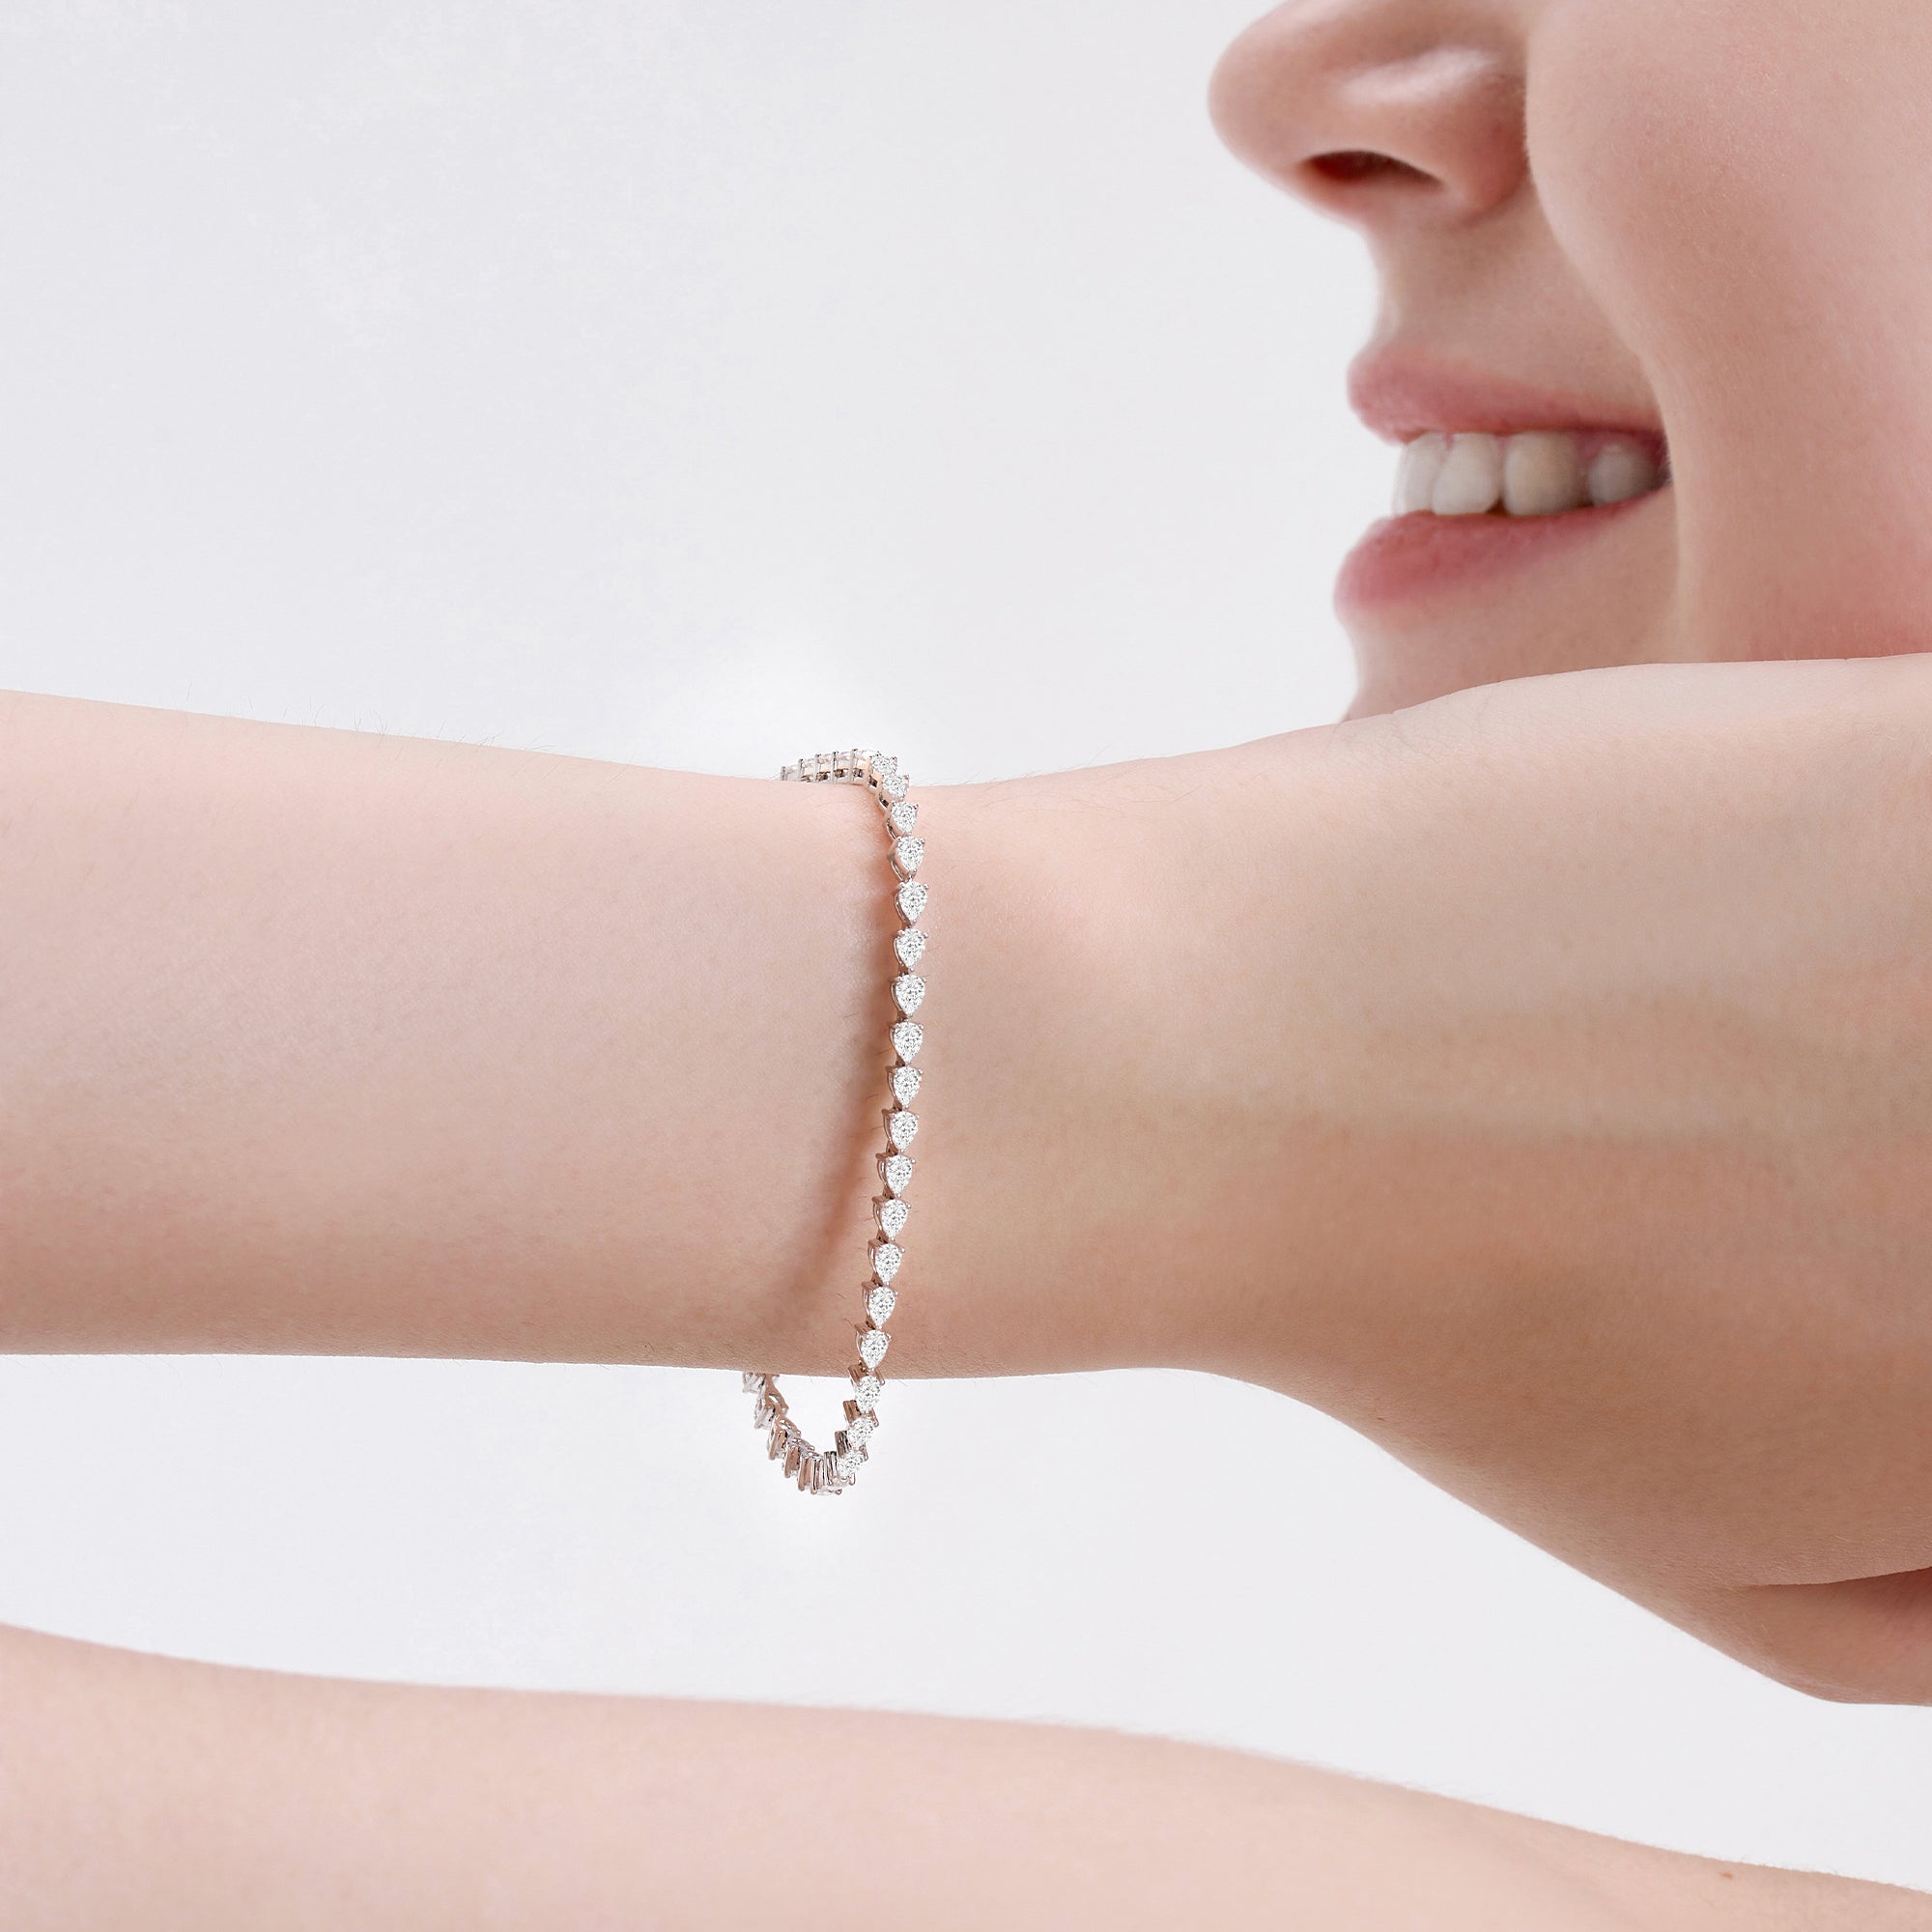 Selecting the right jewelry for each occasion involves careful consideration of style and elegance.